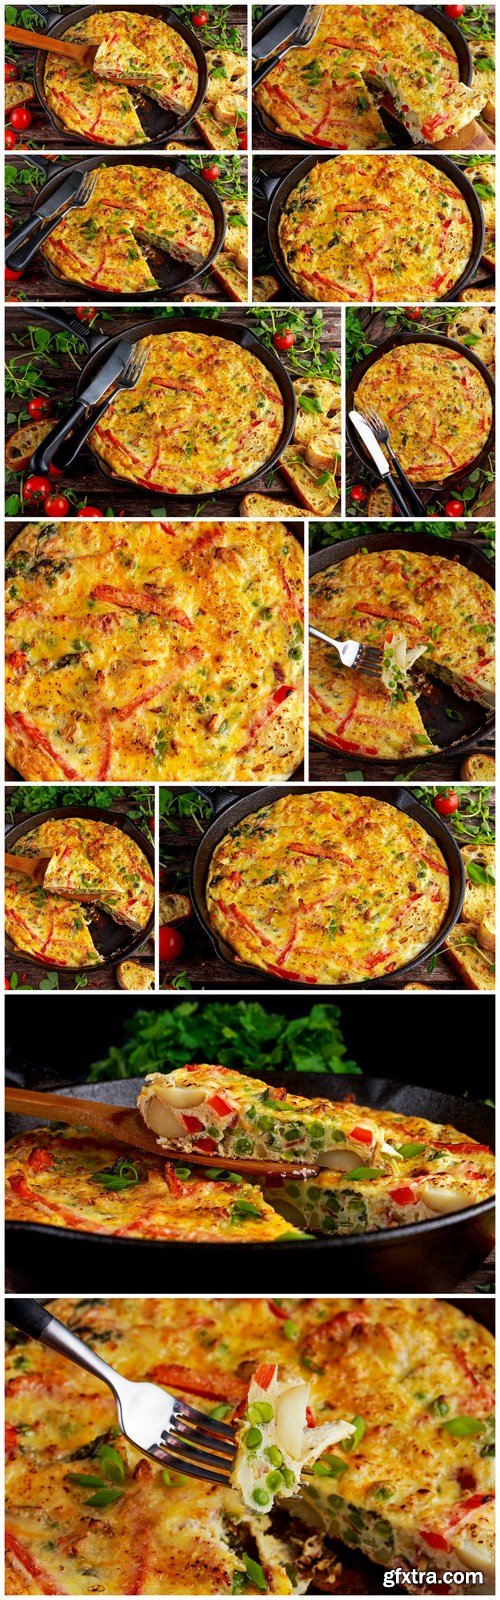 Frittata made of eggs, potato, bacon, paprika, parsley, green peas, onion, cheese in iron pan. on wooden table - 12xUHQ JPEG